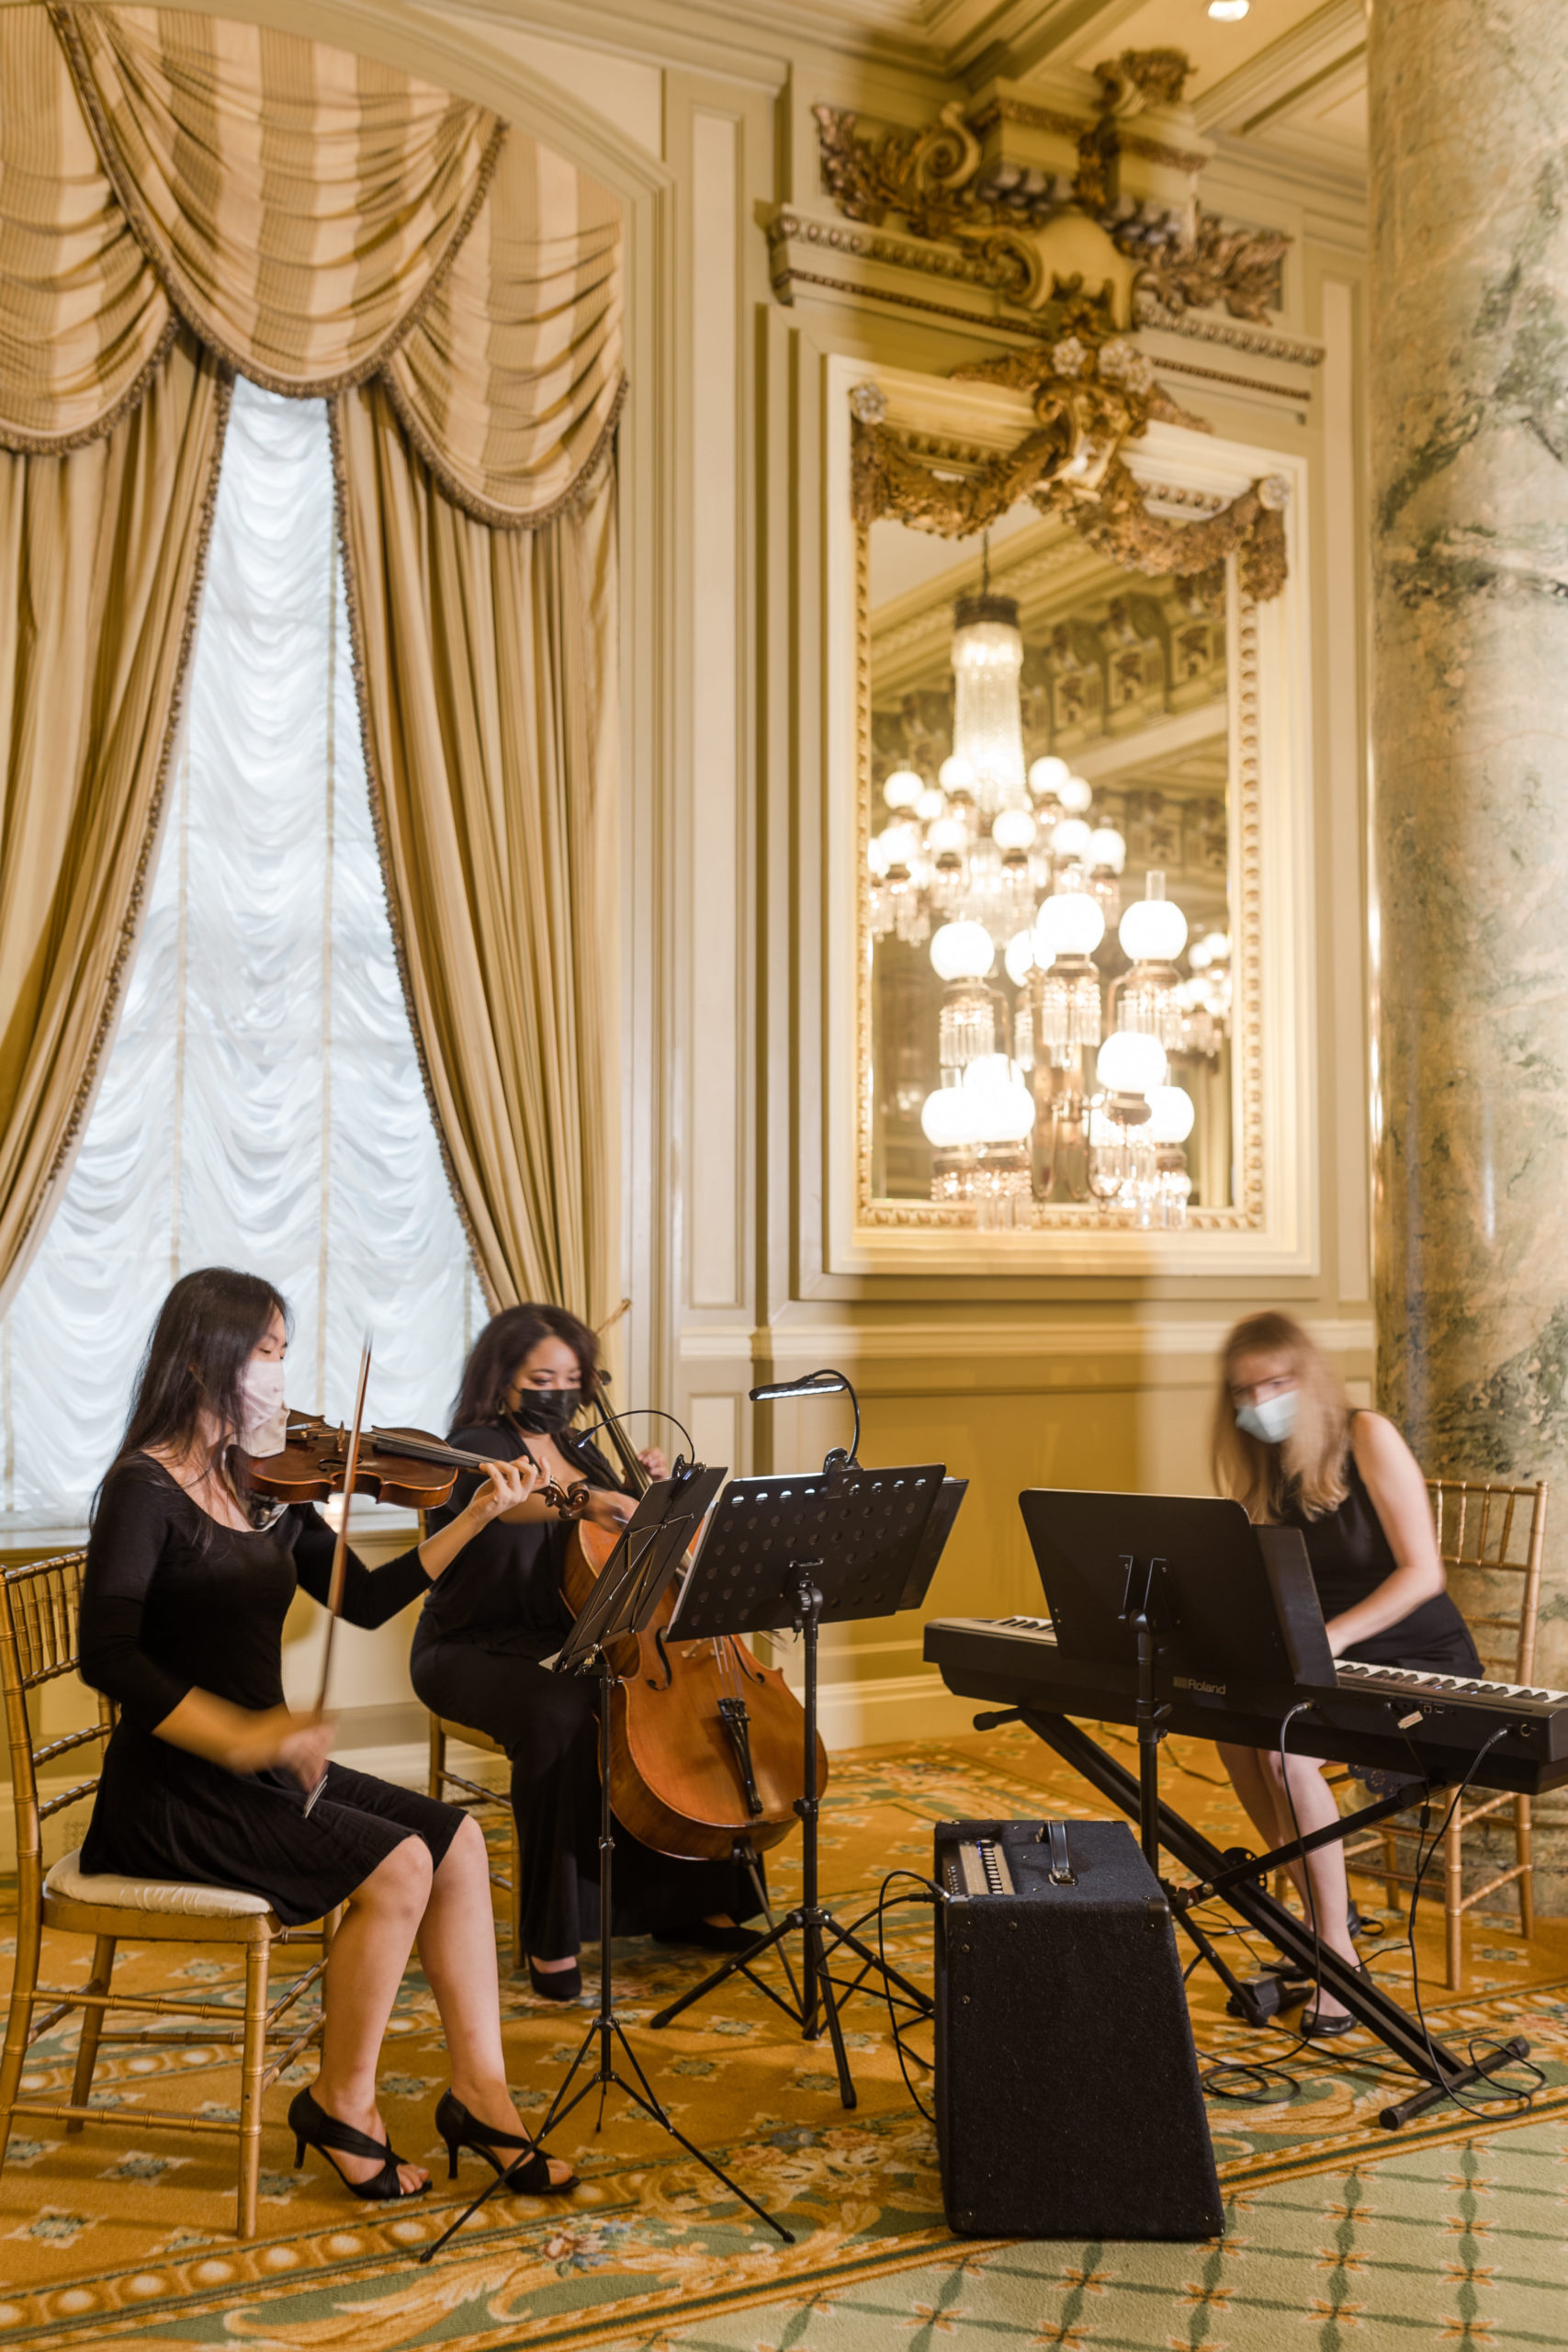 Three women playing their own instruments, including a violin, a cello, and a keyboard piano during a luxurious wedding reception